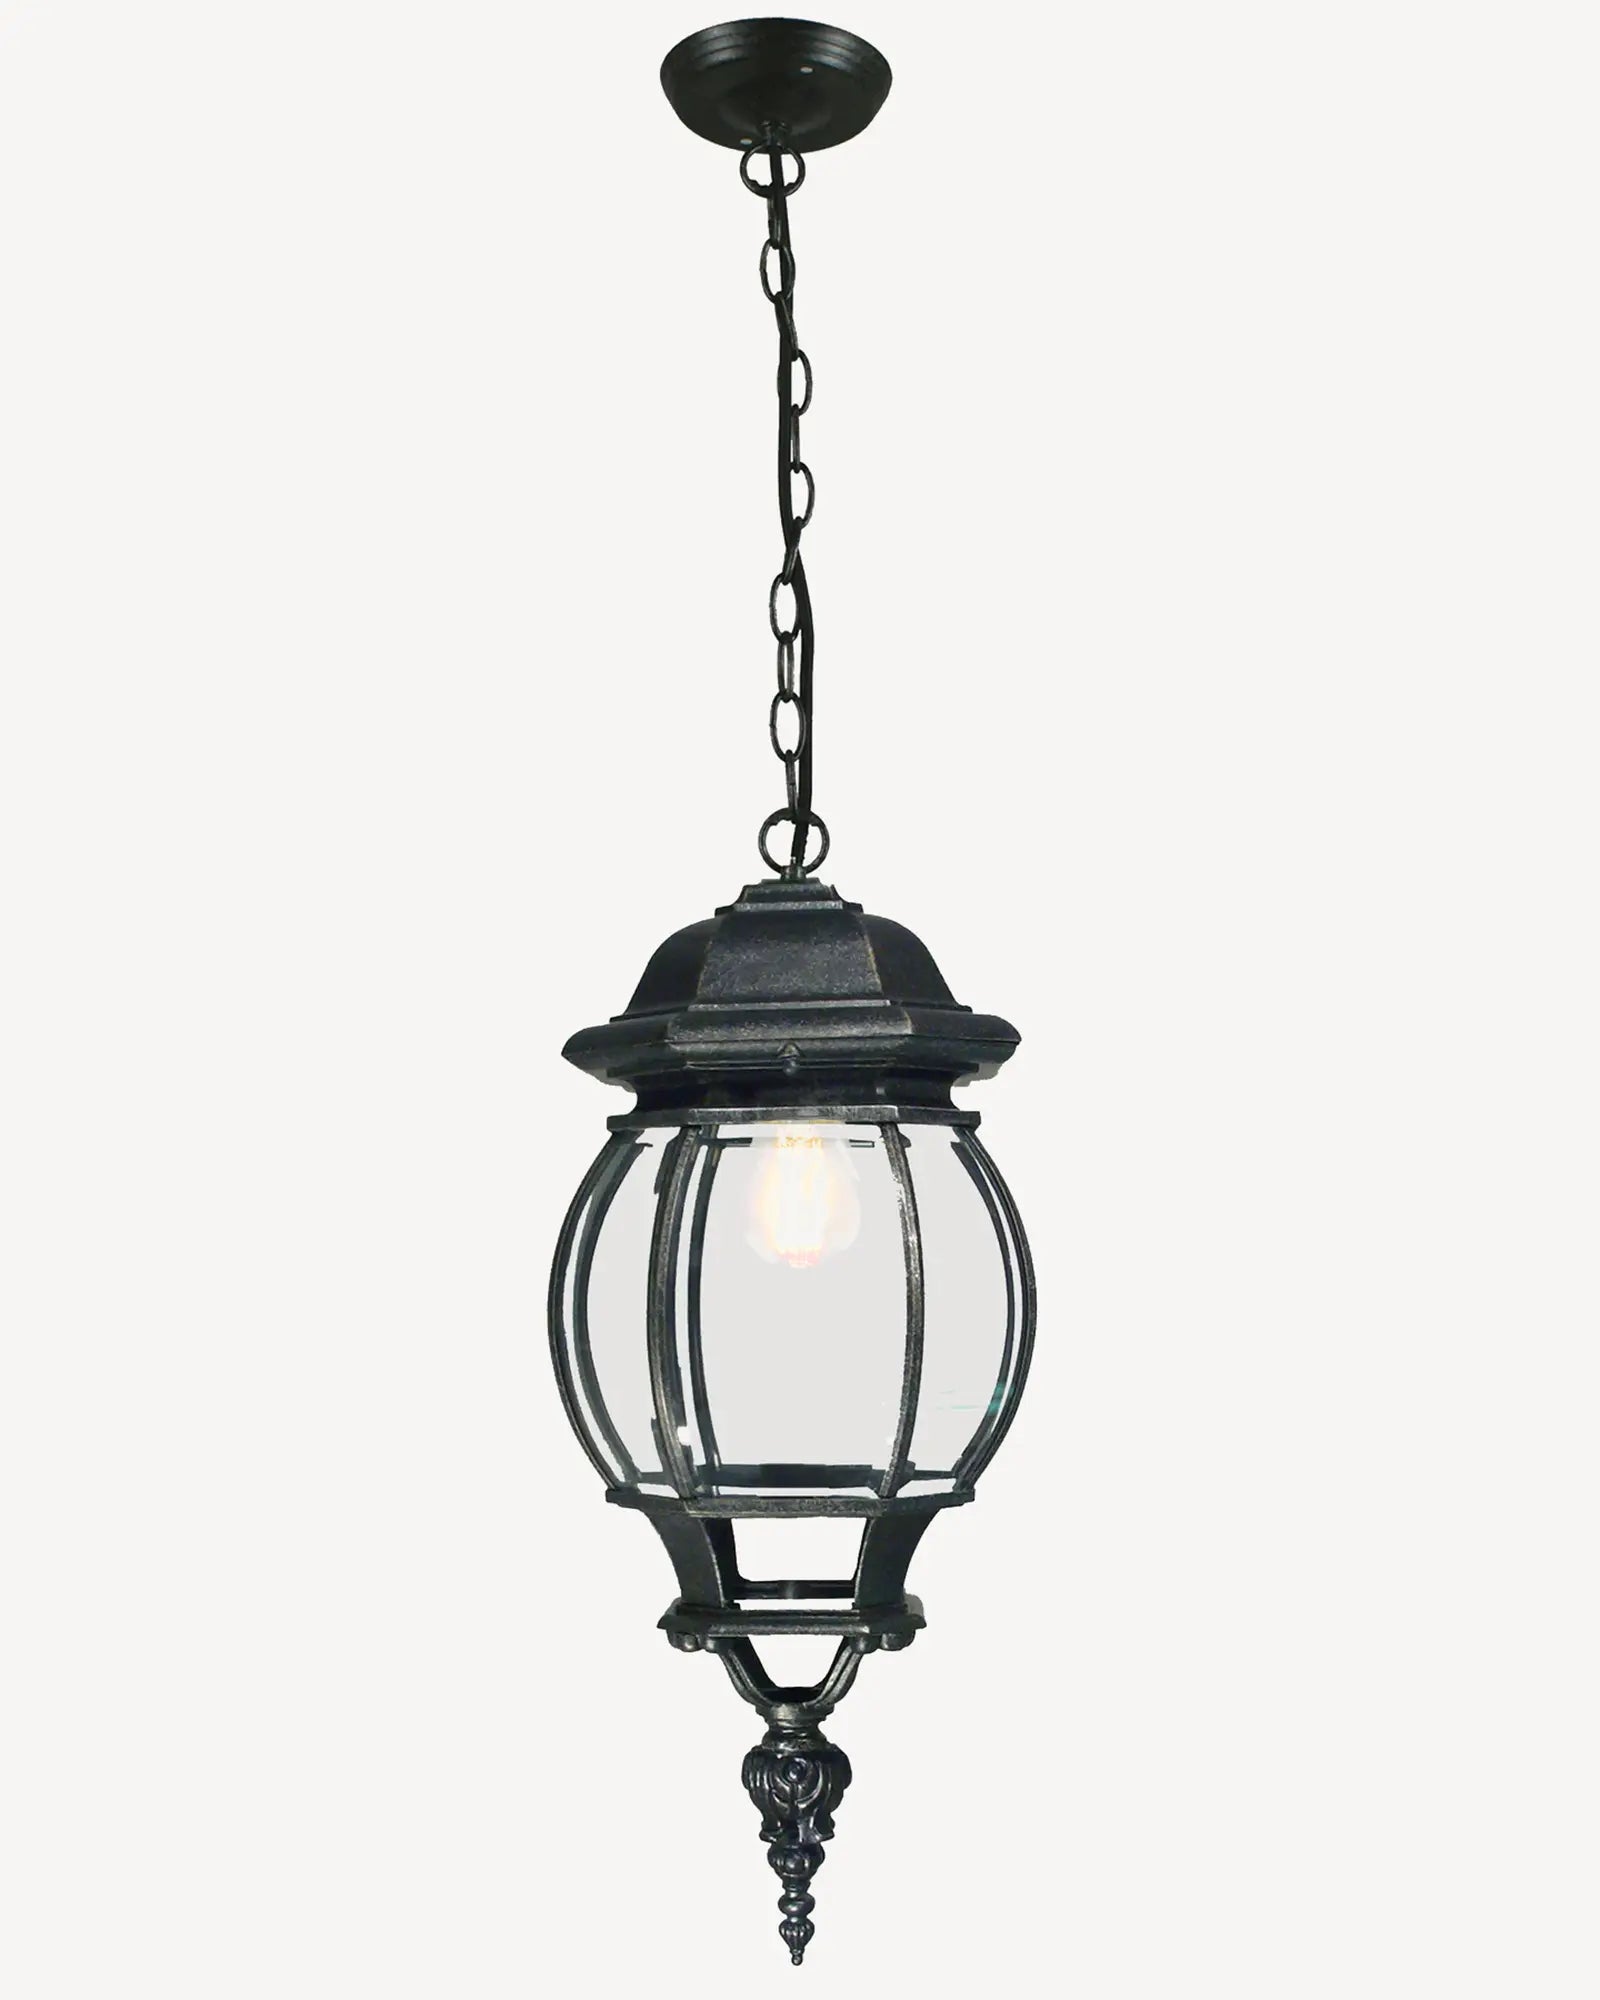 Flinders chain pendant light by Inspiration Light at Nook Collections